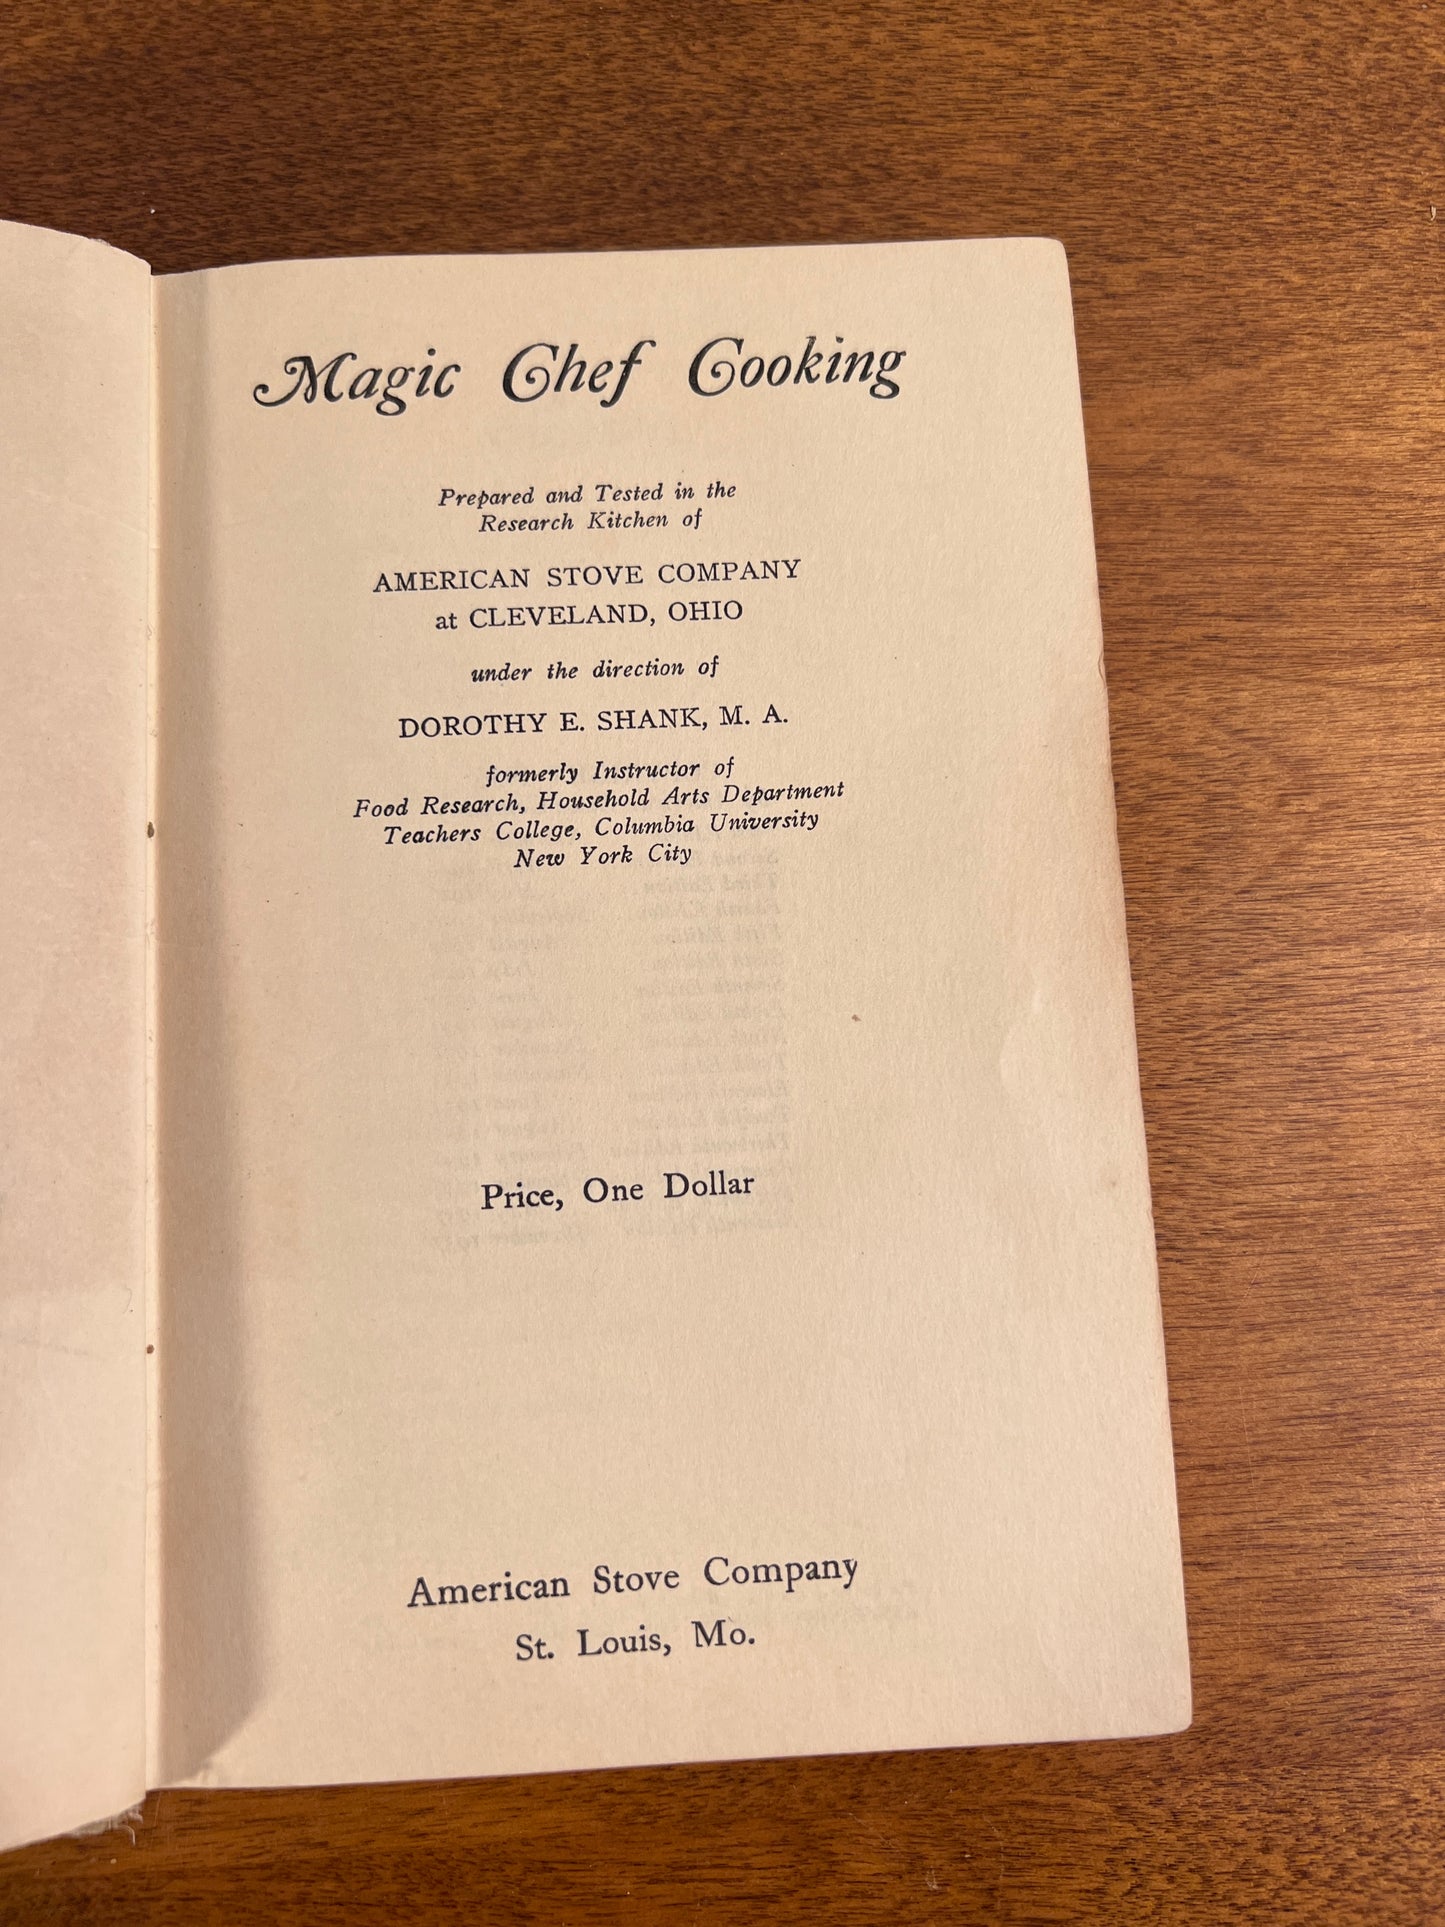 Magic Chef Cooking: Tested in the Research Kitchen of American Stove Company